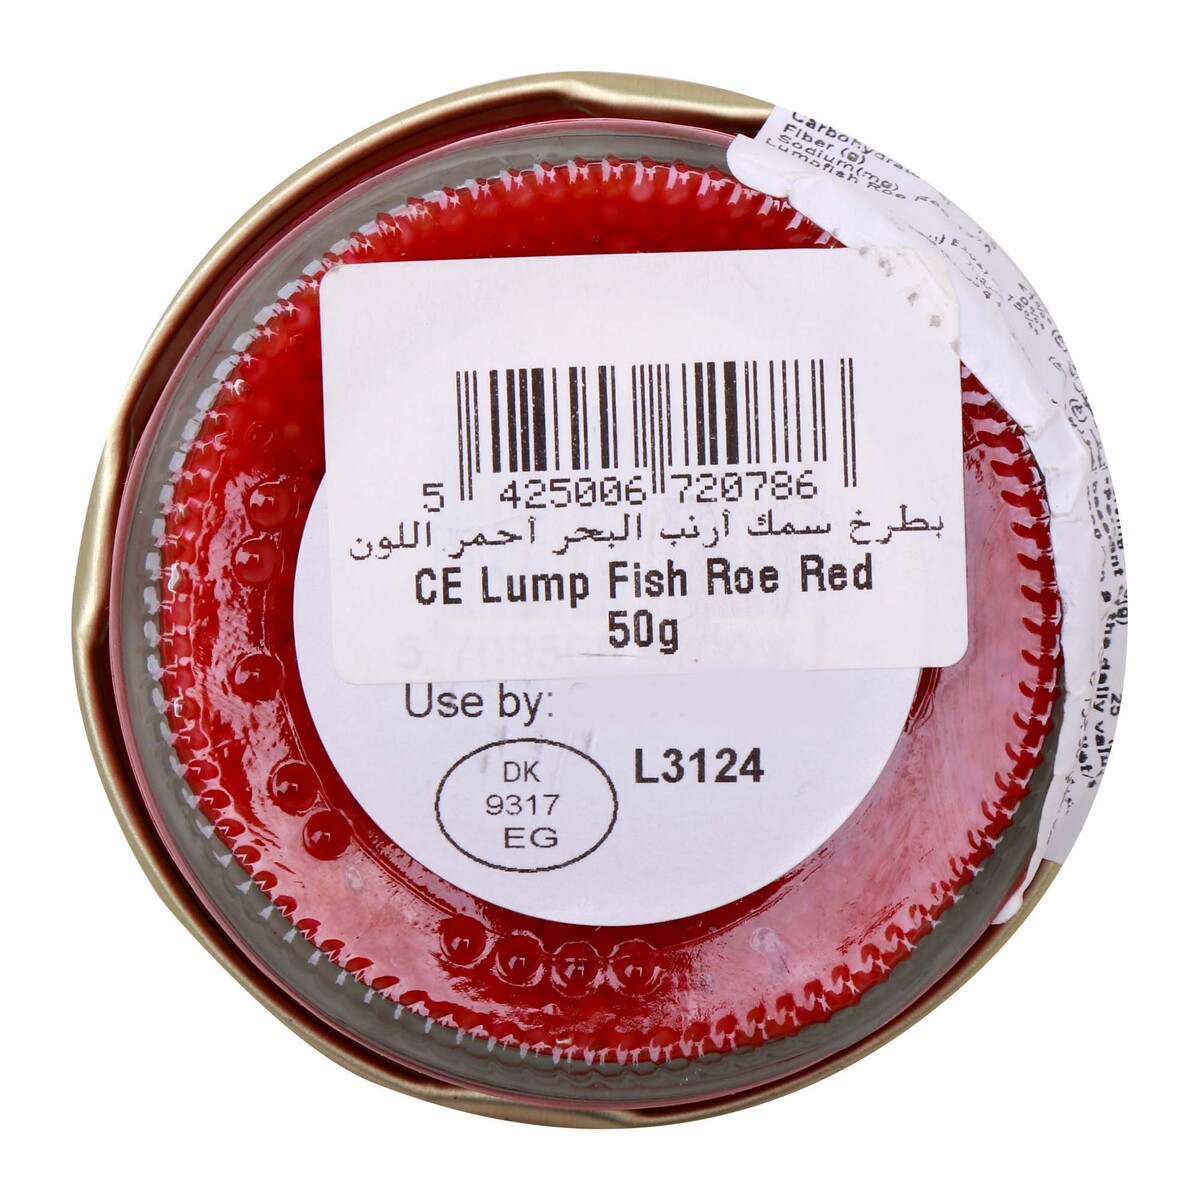 Caviar Exclusives Lump Fish Roe Red 50 g